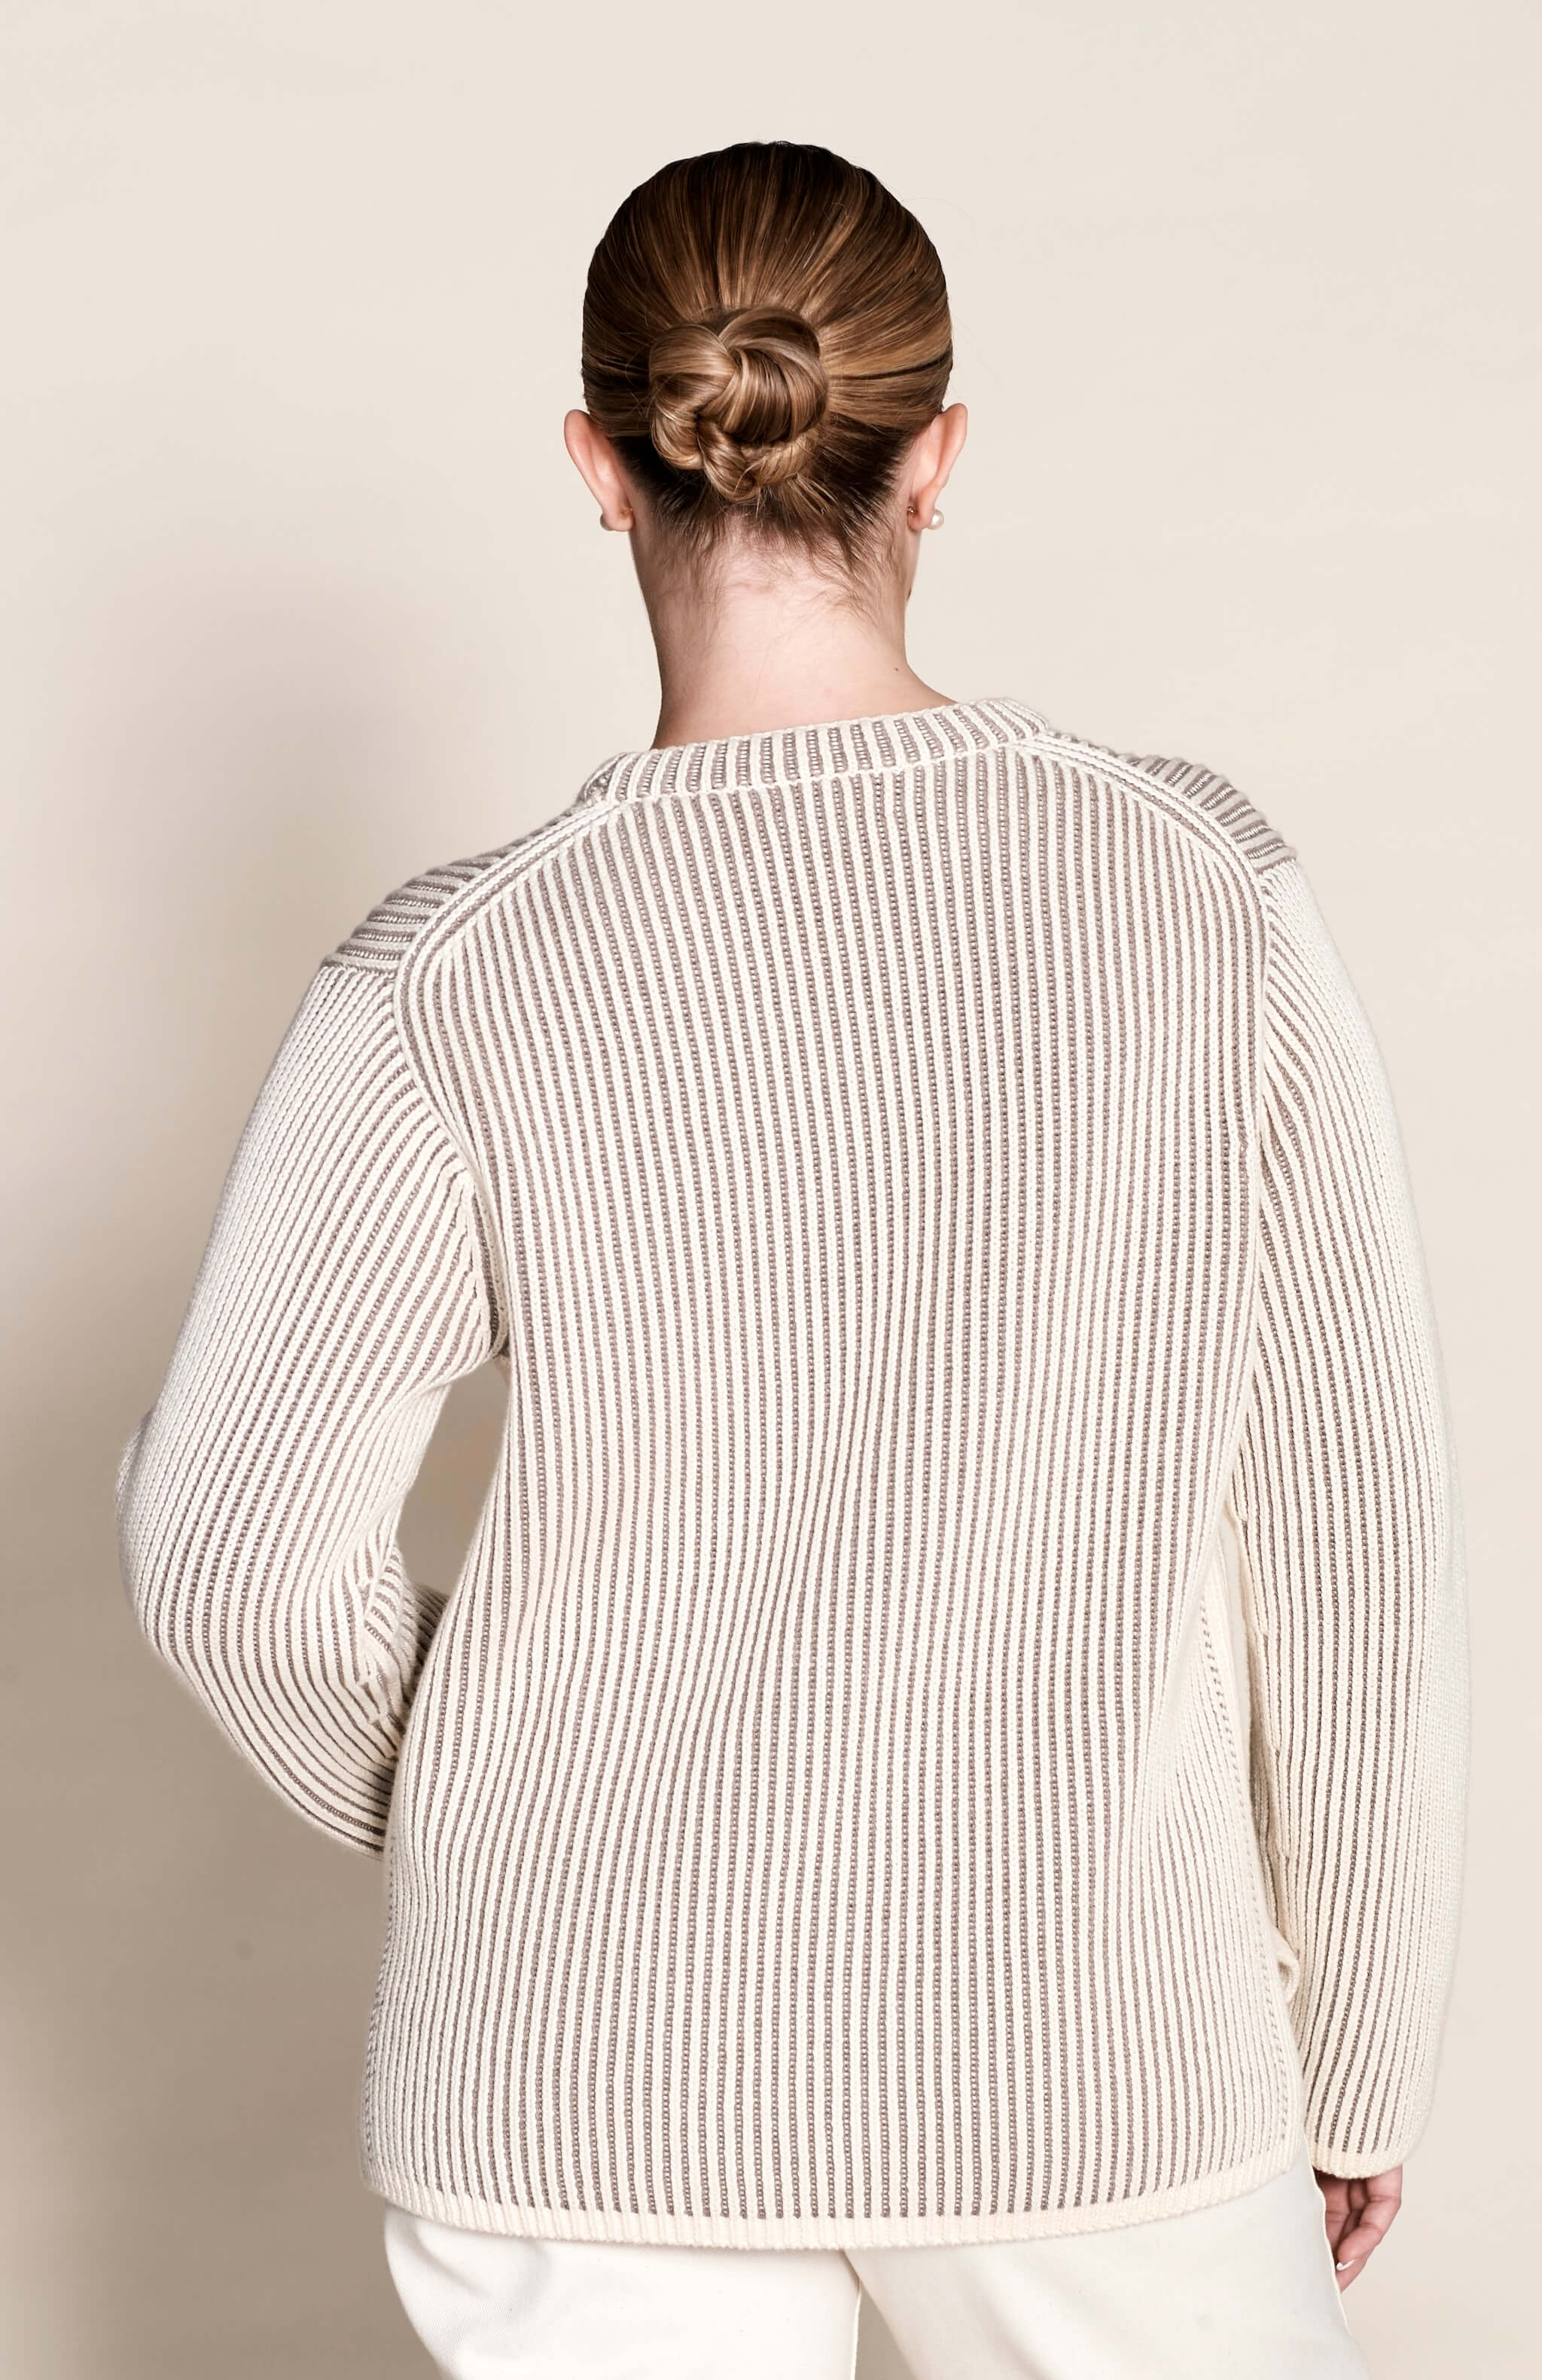 Rear view of a ribbed cashmere knit sweater in cream by Cyme Copenhagen, detailing the fine craftsmanship and use of natural materials that define the brand's sustainable and timeless Scandinavian fashion.